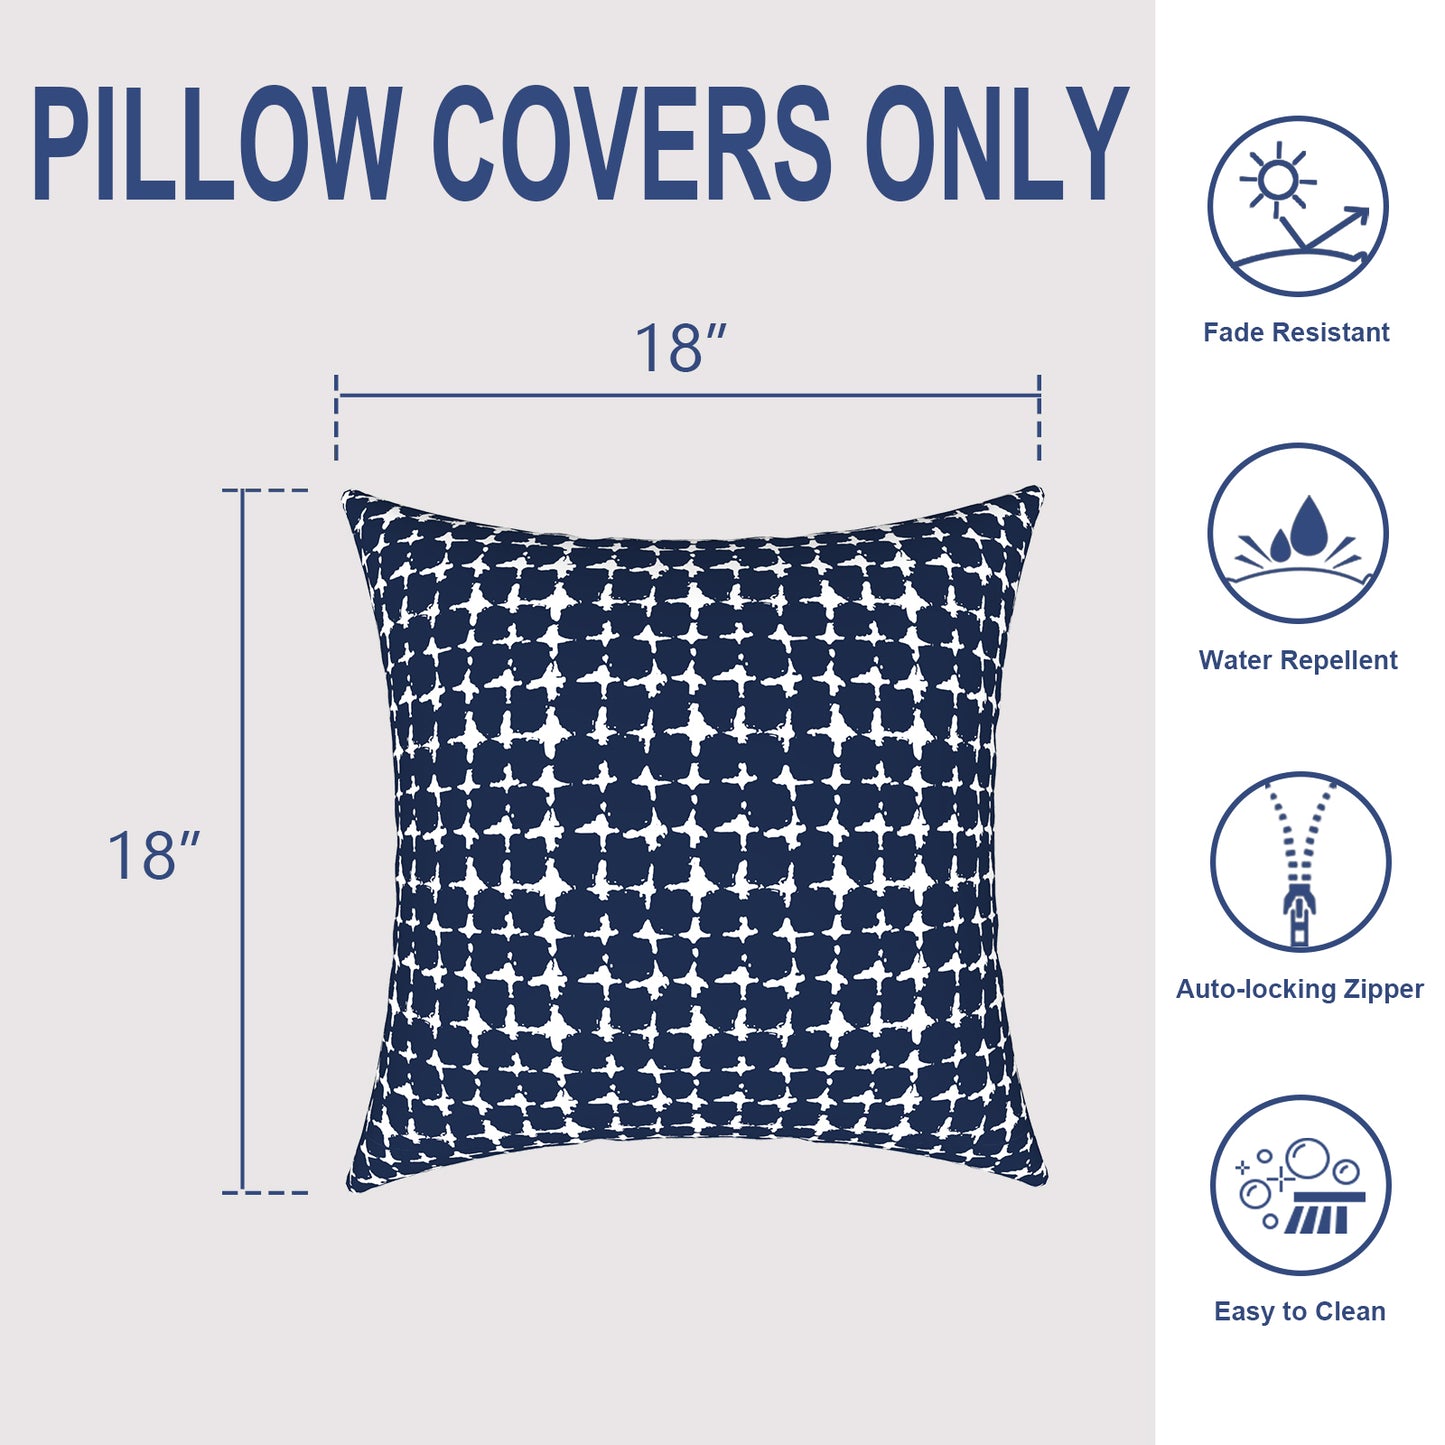 Melody Elephant Outdoor Throw Pillow Covers Pack of 2, Decorative Water Repellent Square Pillow Cases 18x18 Inch, Patio Pillowcases for Home Patio Furniture Use, Tie-Dye Navy